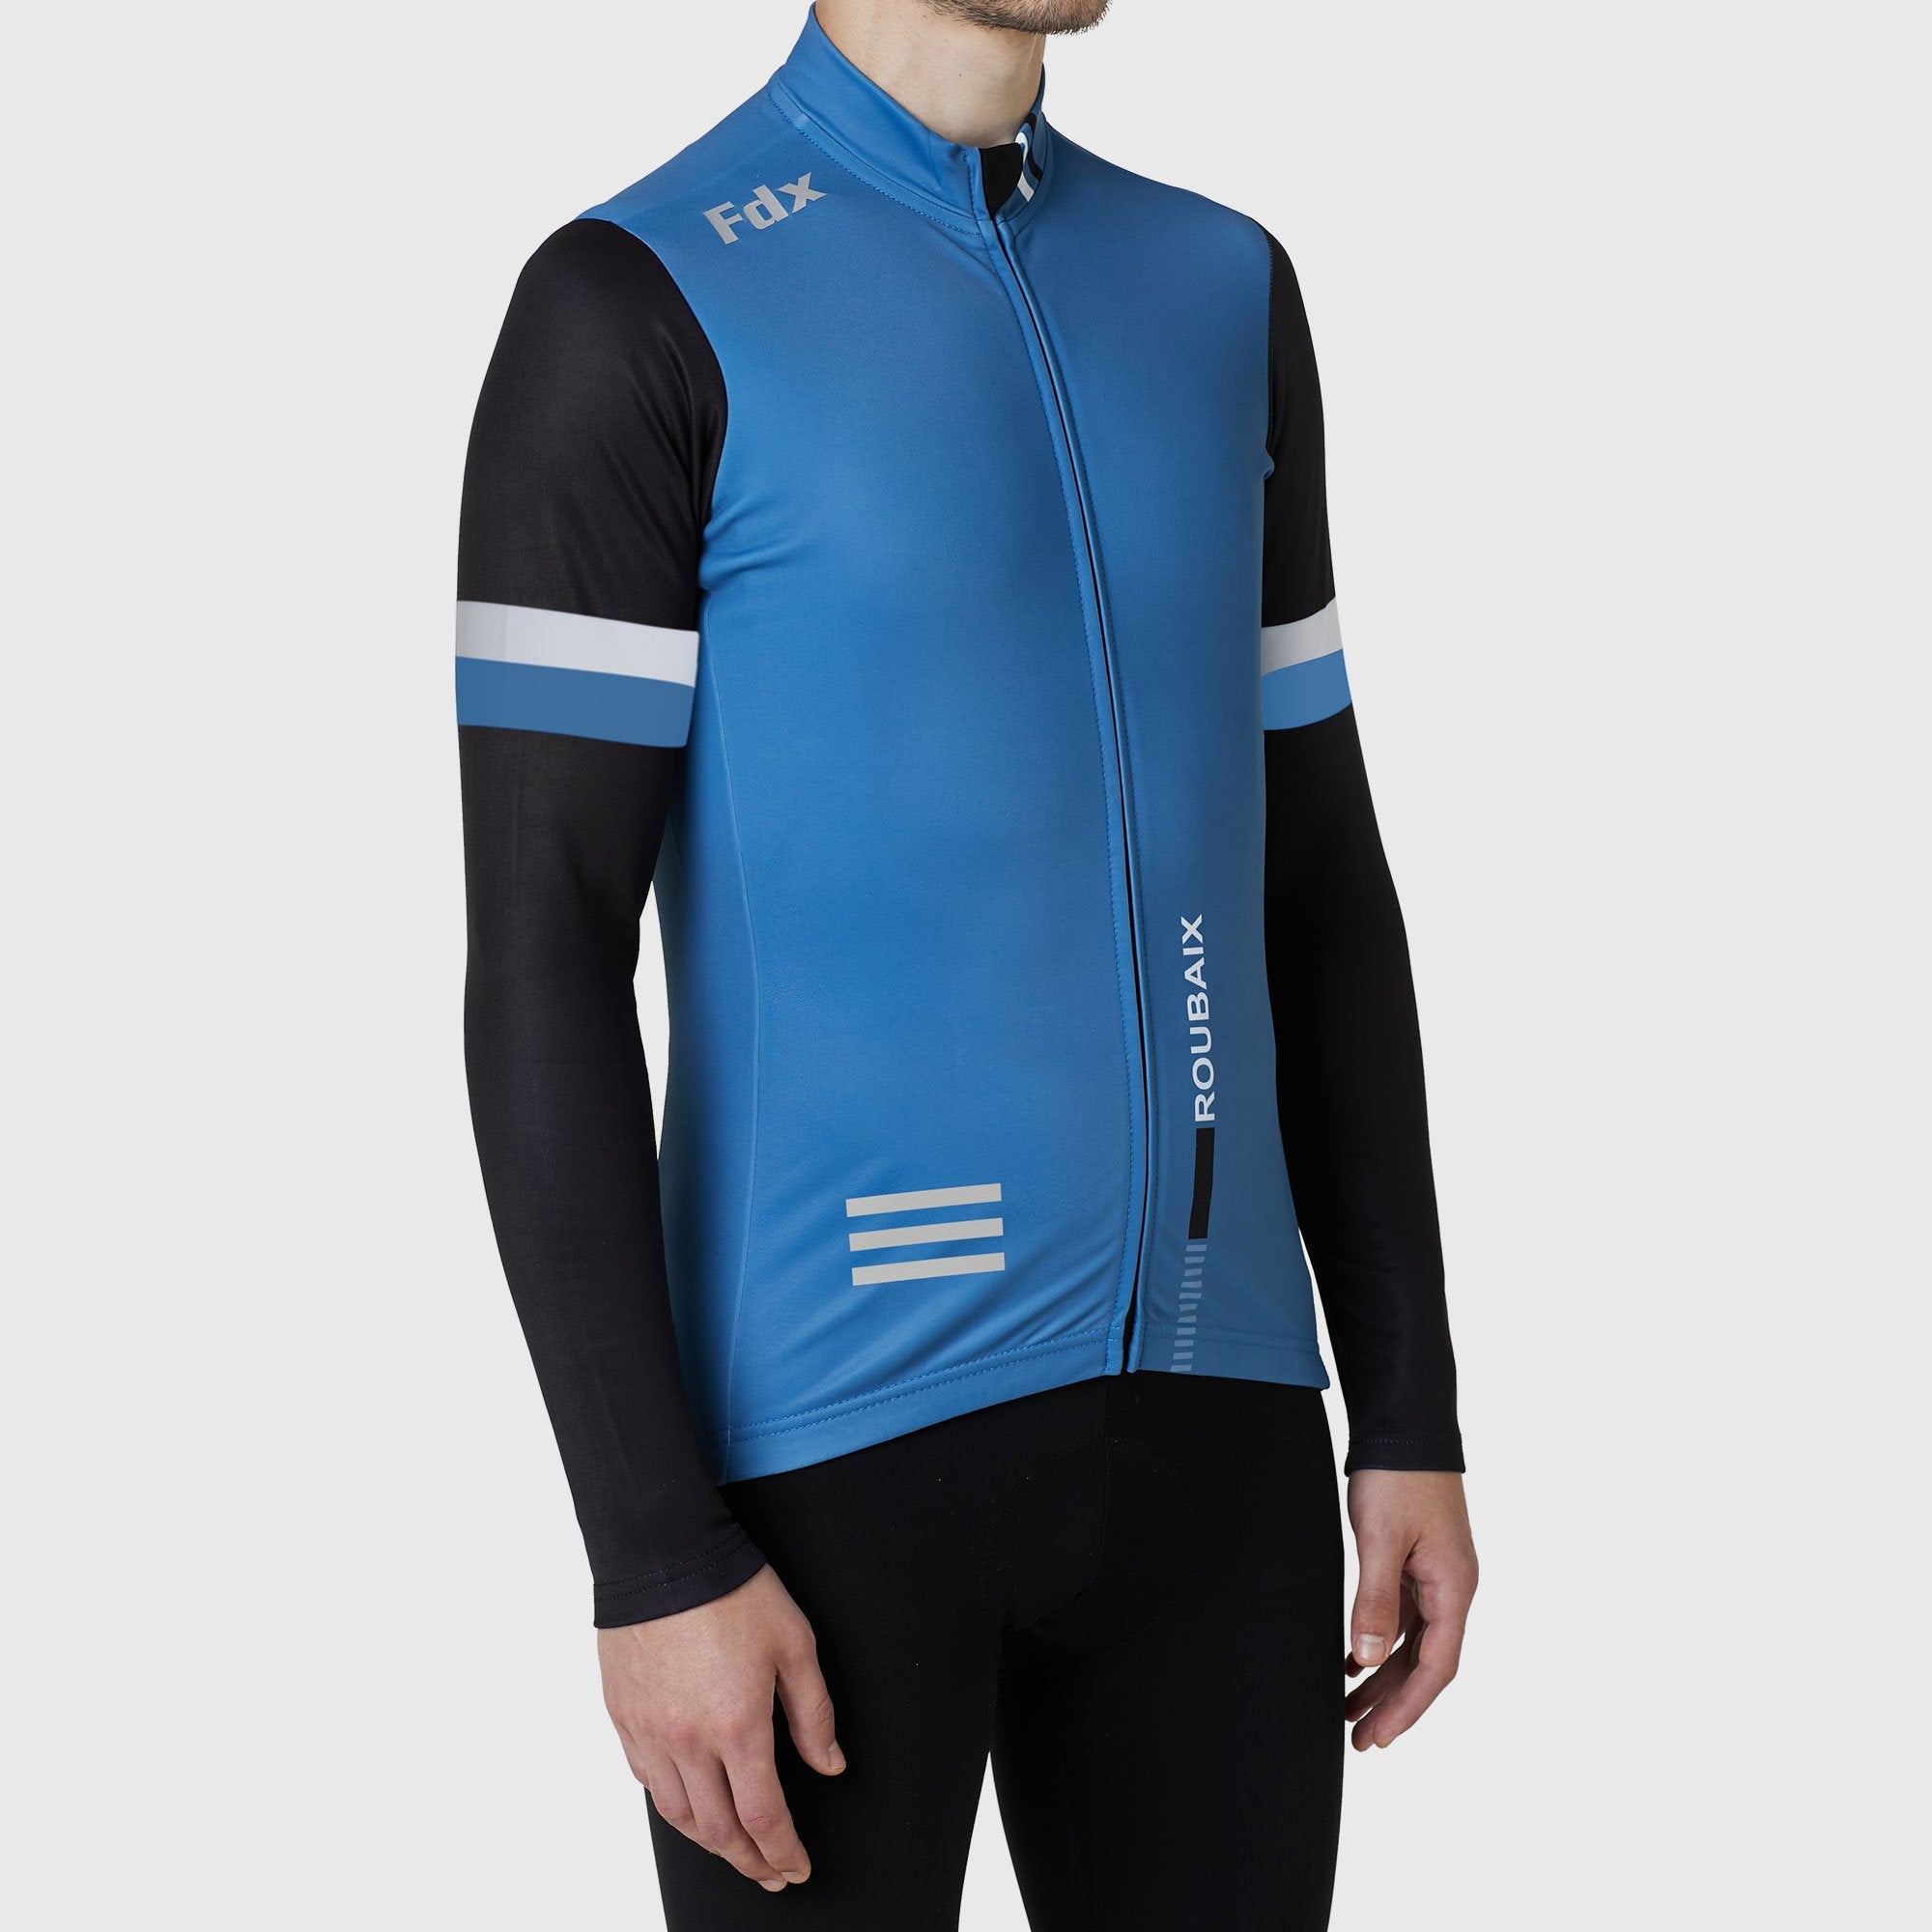 FDX - Edition Men\'s Fdx Limited Jersey Thermal | Cycling FDX Sports® Sports Sleeve Blue Long US